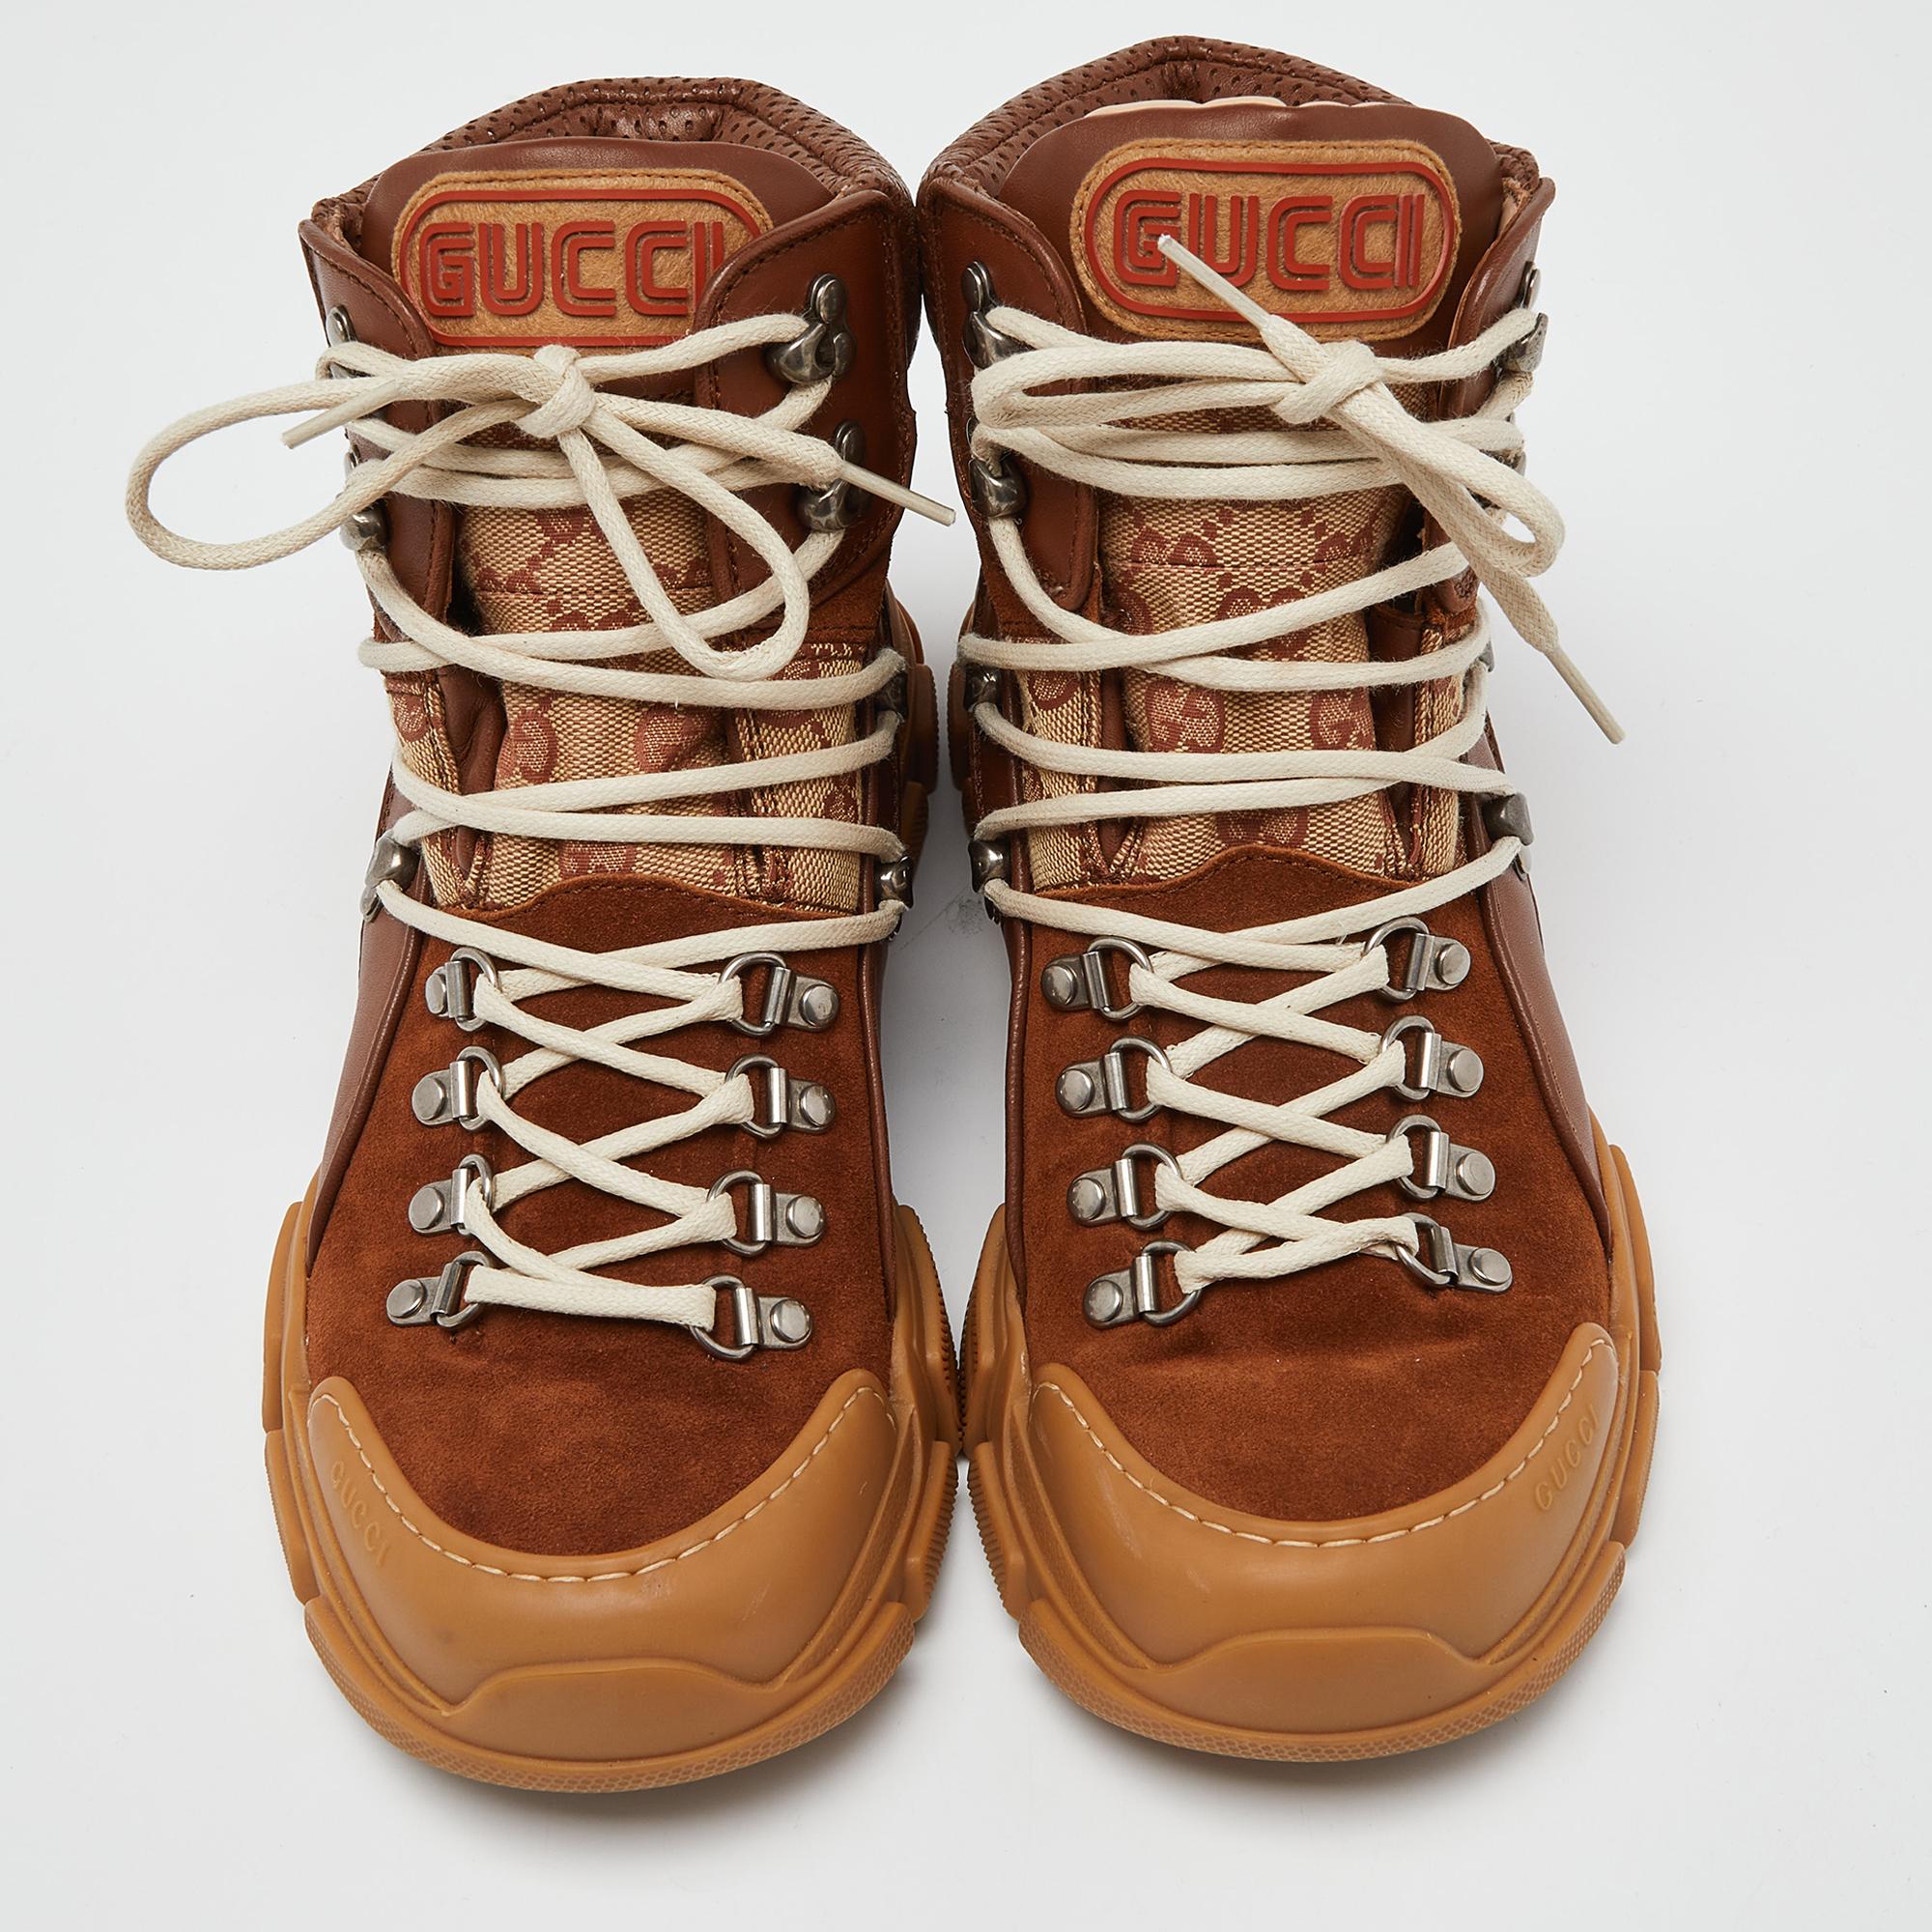 Don't miss out on making these sneakers yours this season. Crafted from GG canvas, suede & leather, these Gucci Journey Hiker boots feature lace-up vamps, rubber soles, and leather insoles for added comfort.

Includes: Original Dustbag

